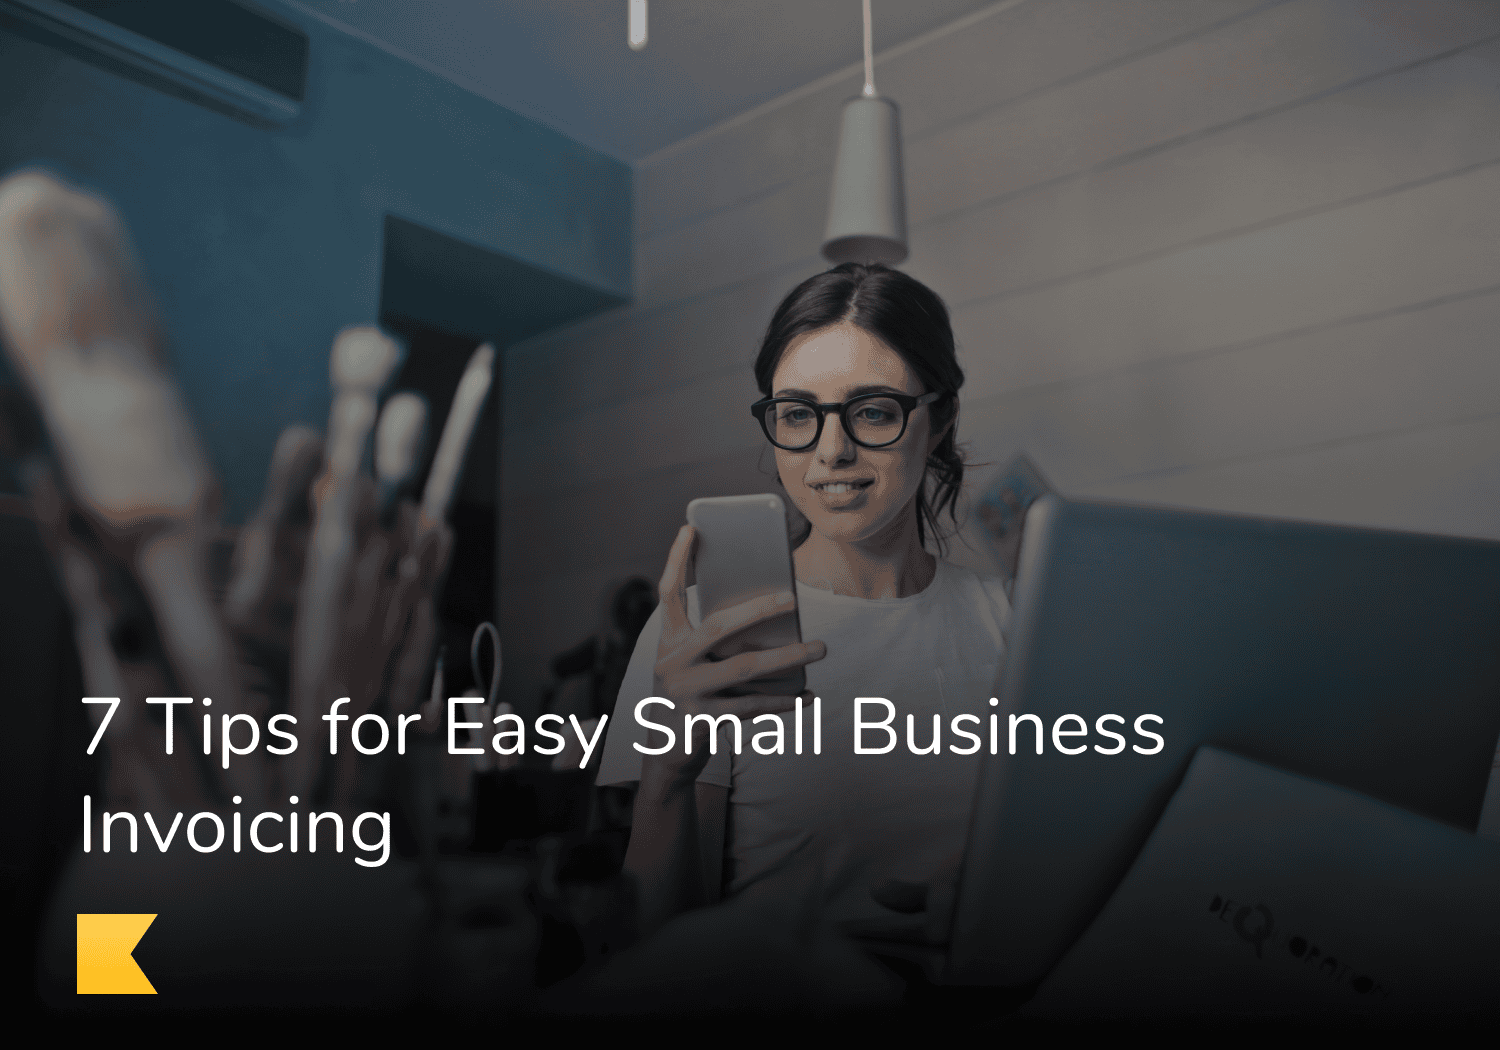 7 Tips for Easy Small Business Invoicing